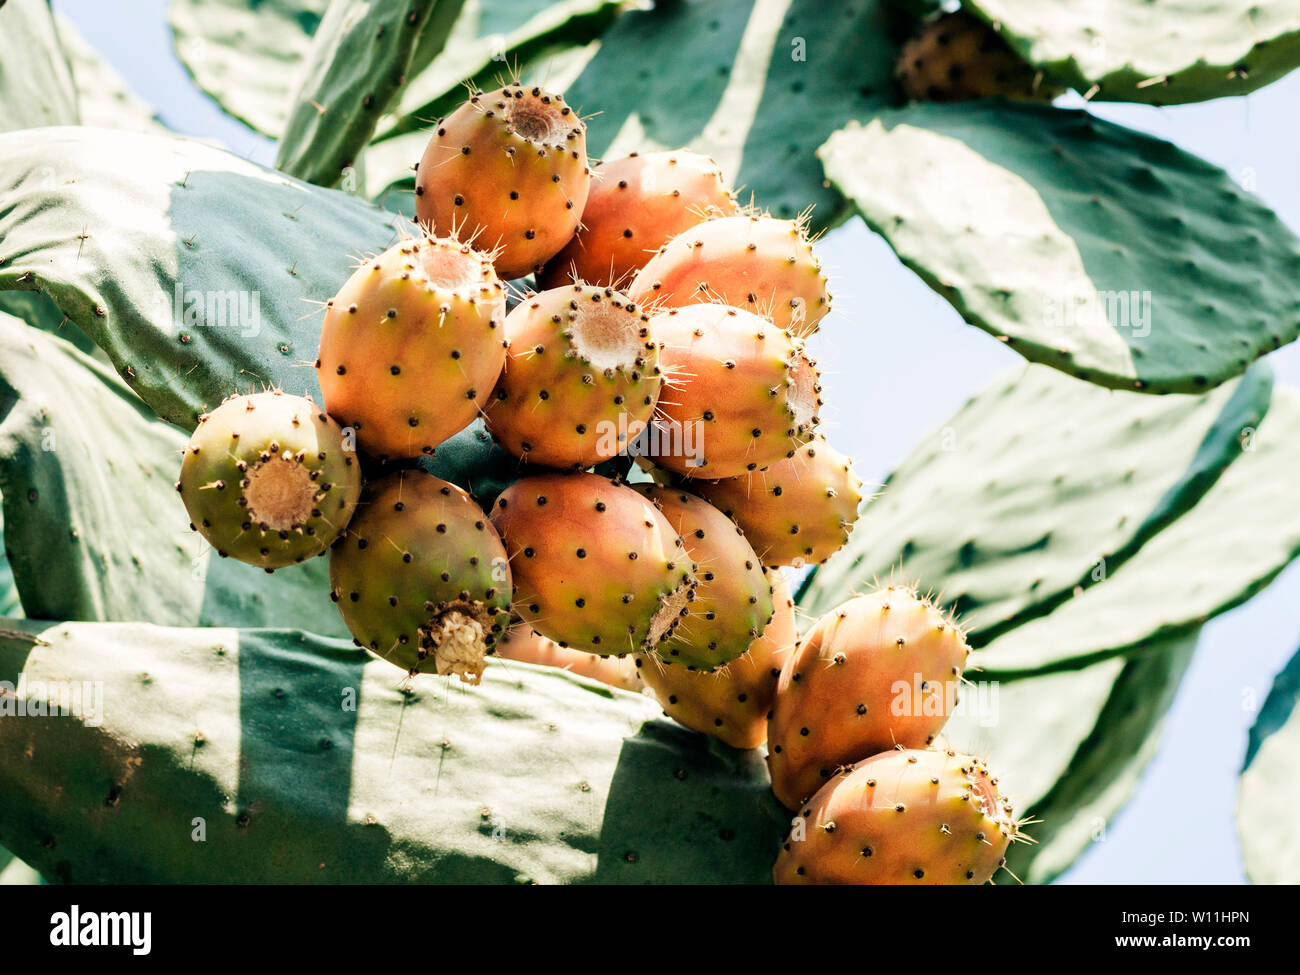 Fruits of Prickly pear cactus with fruits also known as Opuntia, ficus-indica, Indian fig opuntia in the street of Taormina, Sicily, Italy Stock Photo